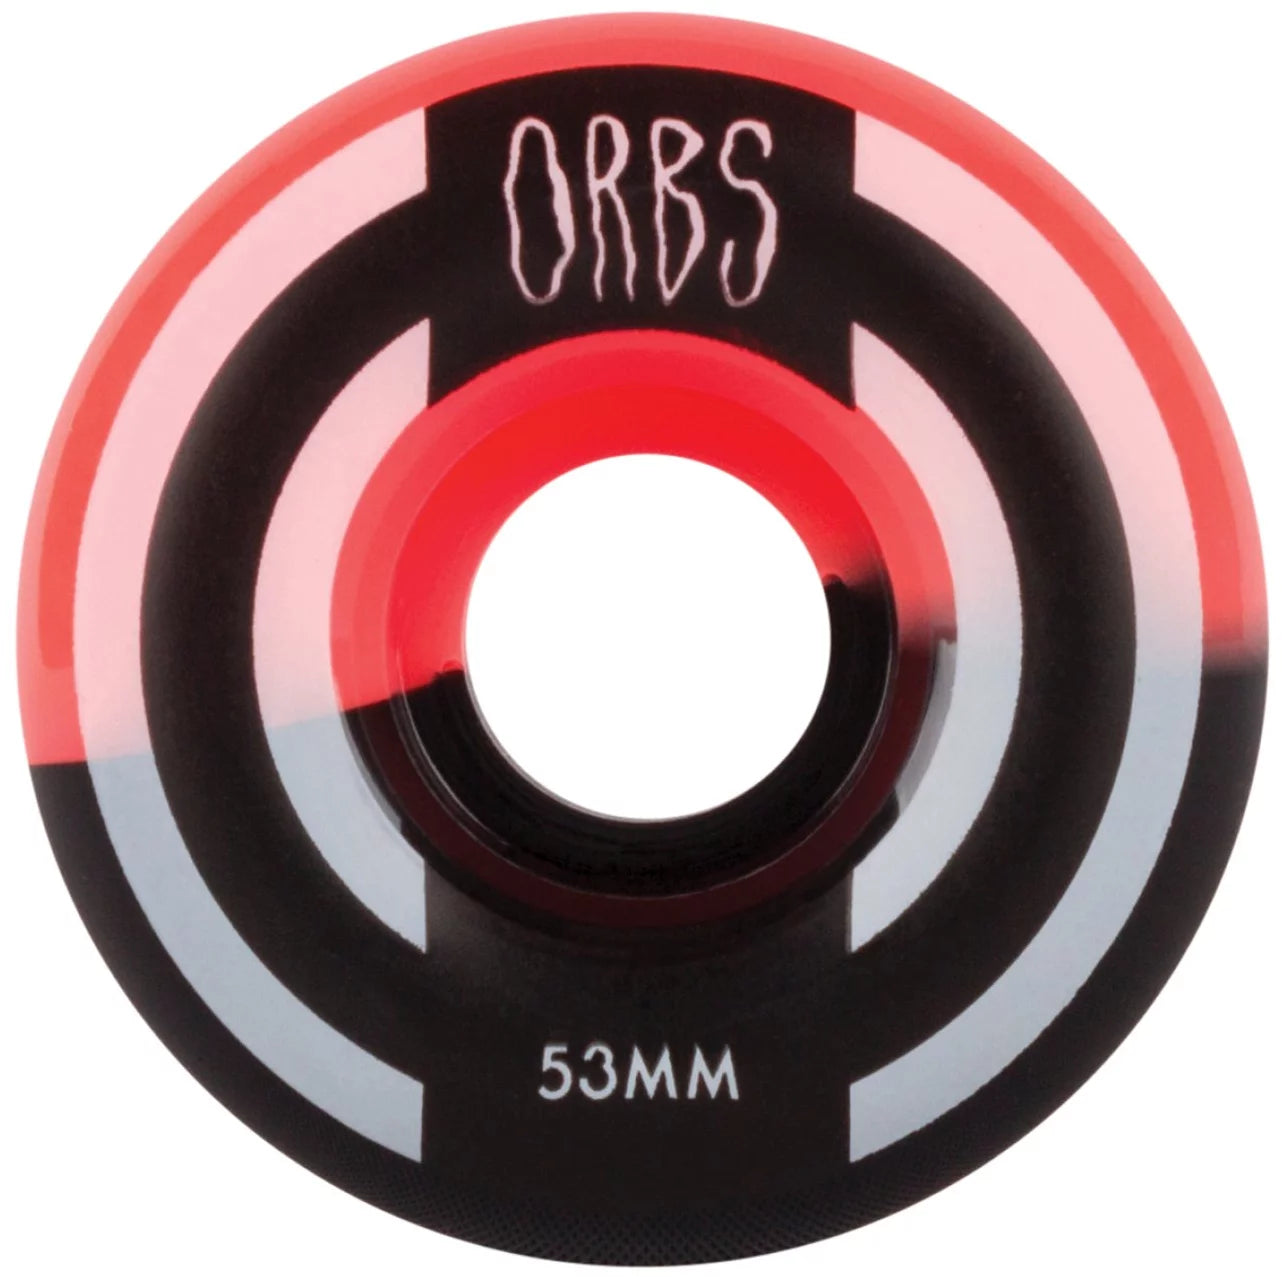 Orbs Wheels - Apparations